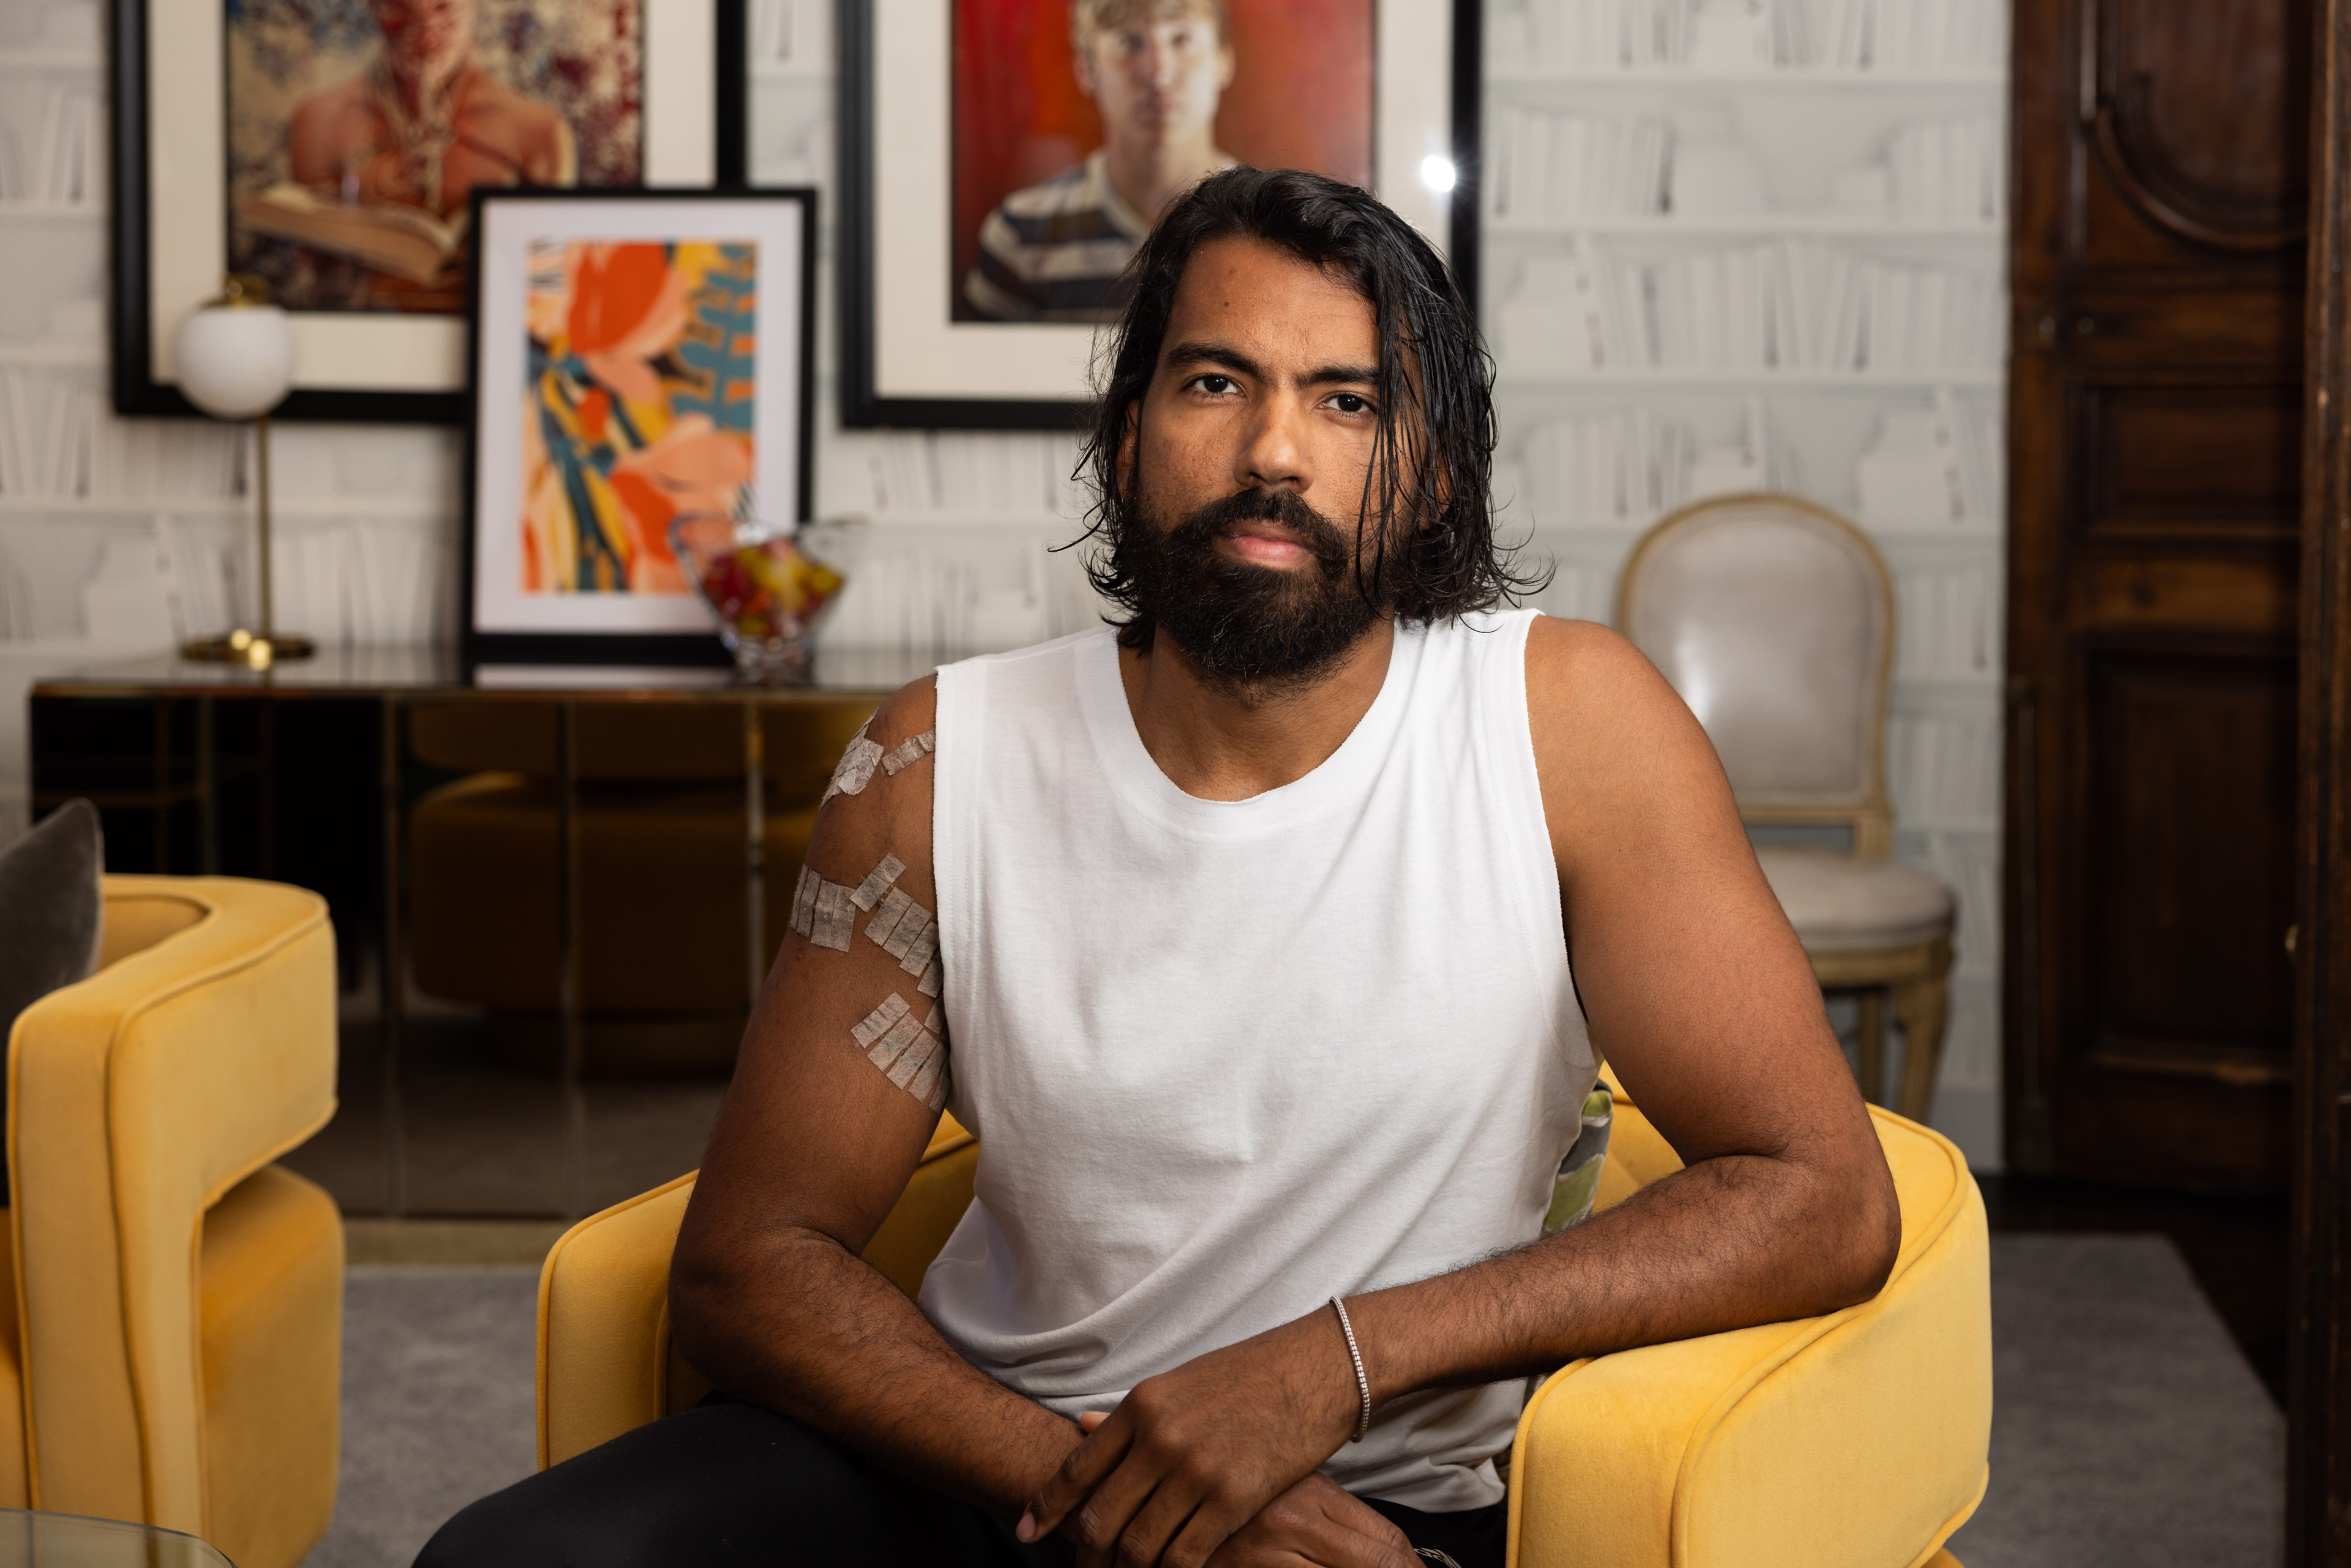 A bearded man with shoulder-length hair sits in a yellow chair, wearing a sleeveless white shirt with medical tape on his arm, in a room with framed art and cozy furnishings.